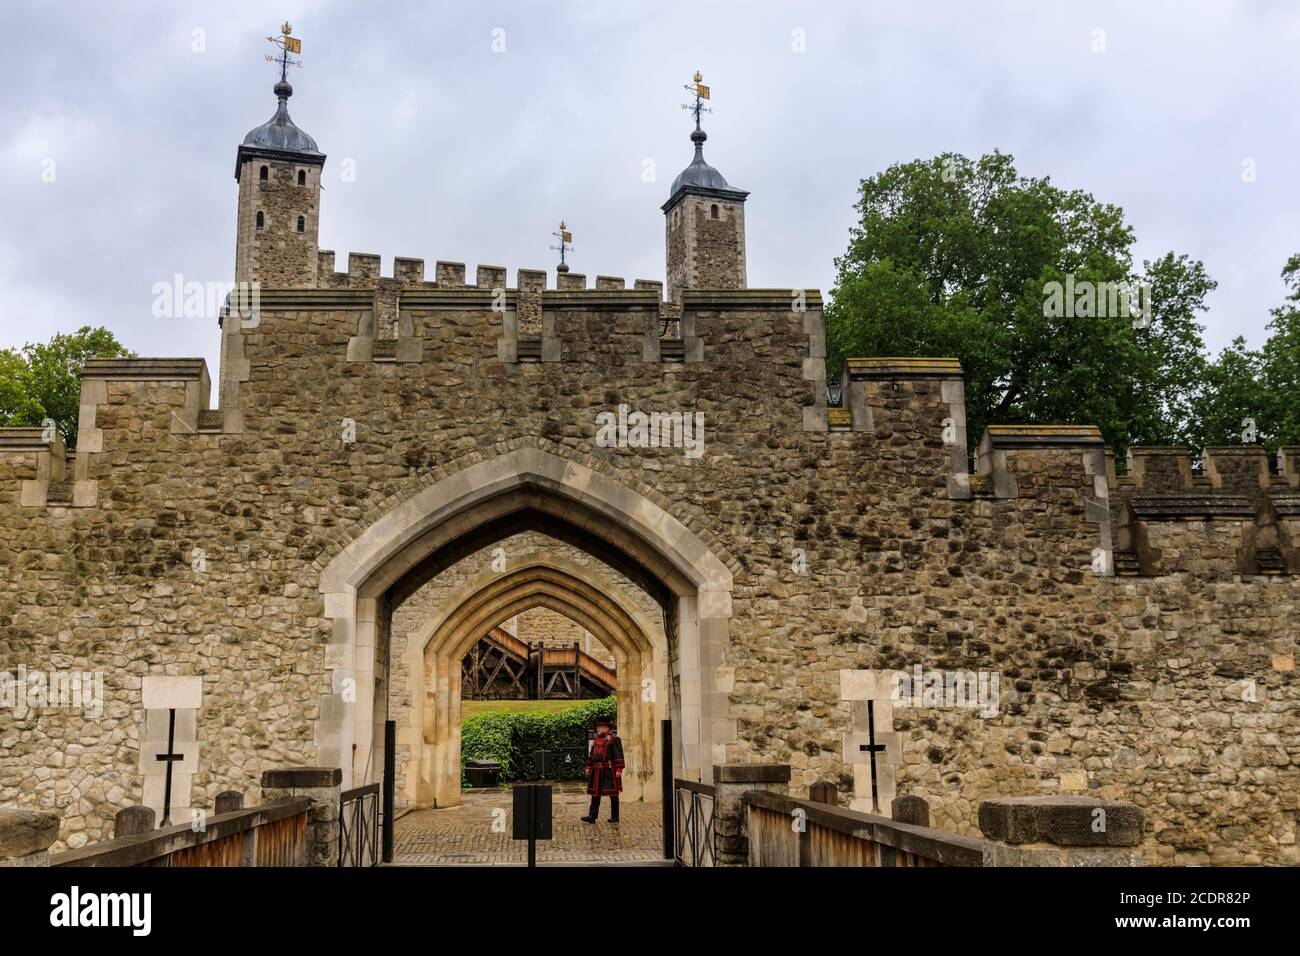 Tower of London, her Majesty's Royal Palace und Fortress of the Tower of London, London, Großbritannien Stockfoto